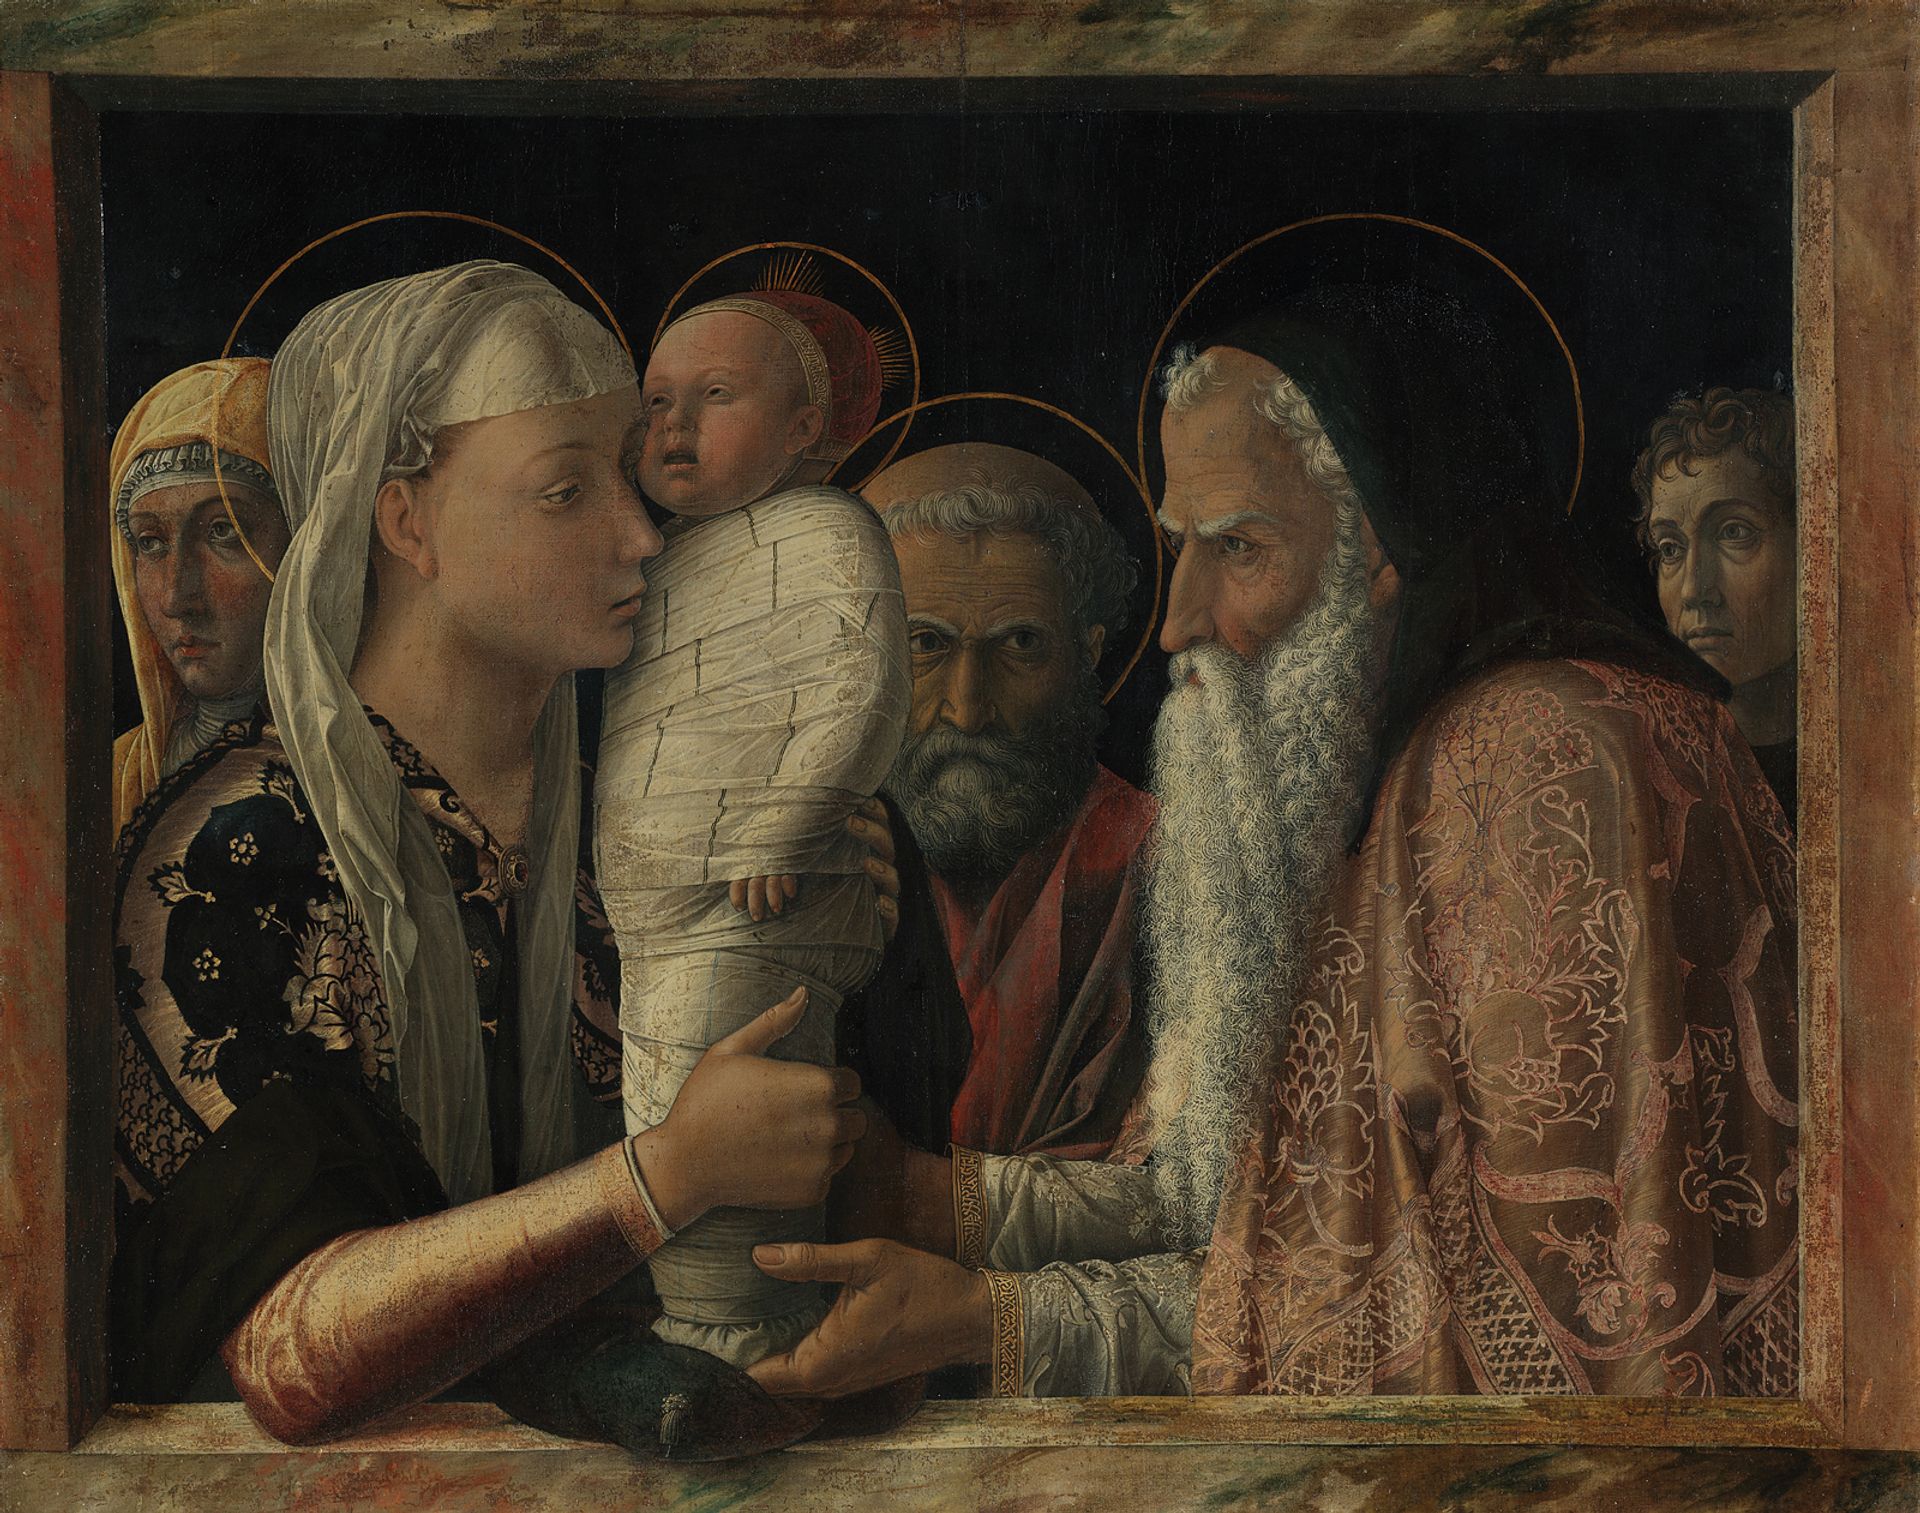 Mantegna’s The Presentation of Christ in the Temple (around 1454), which includes a self-portrait of the artist at the far right, was later copied by Bellini Mantegna: Christoph Schmidt; © Gemäldegalerie/Staatliche Museen zu Berlin